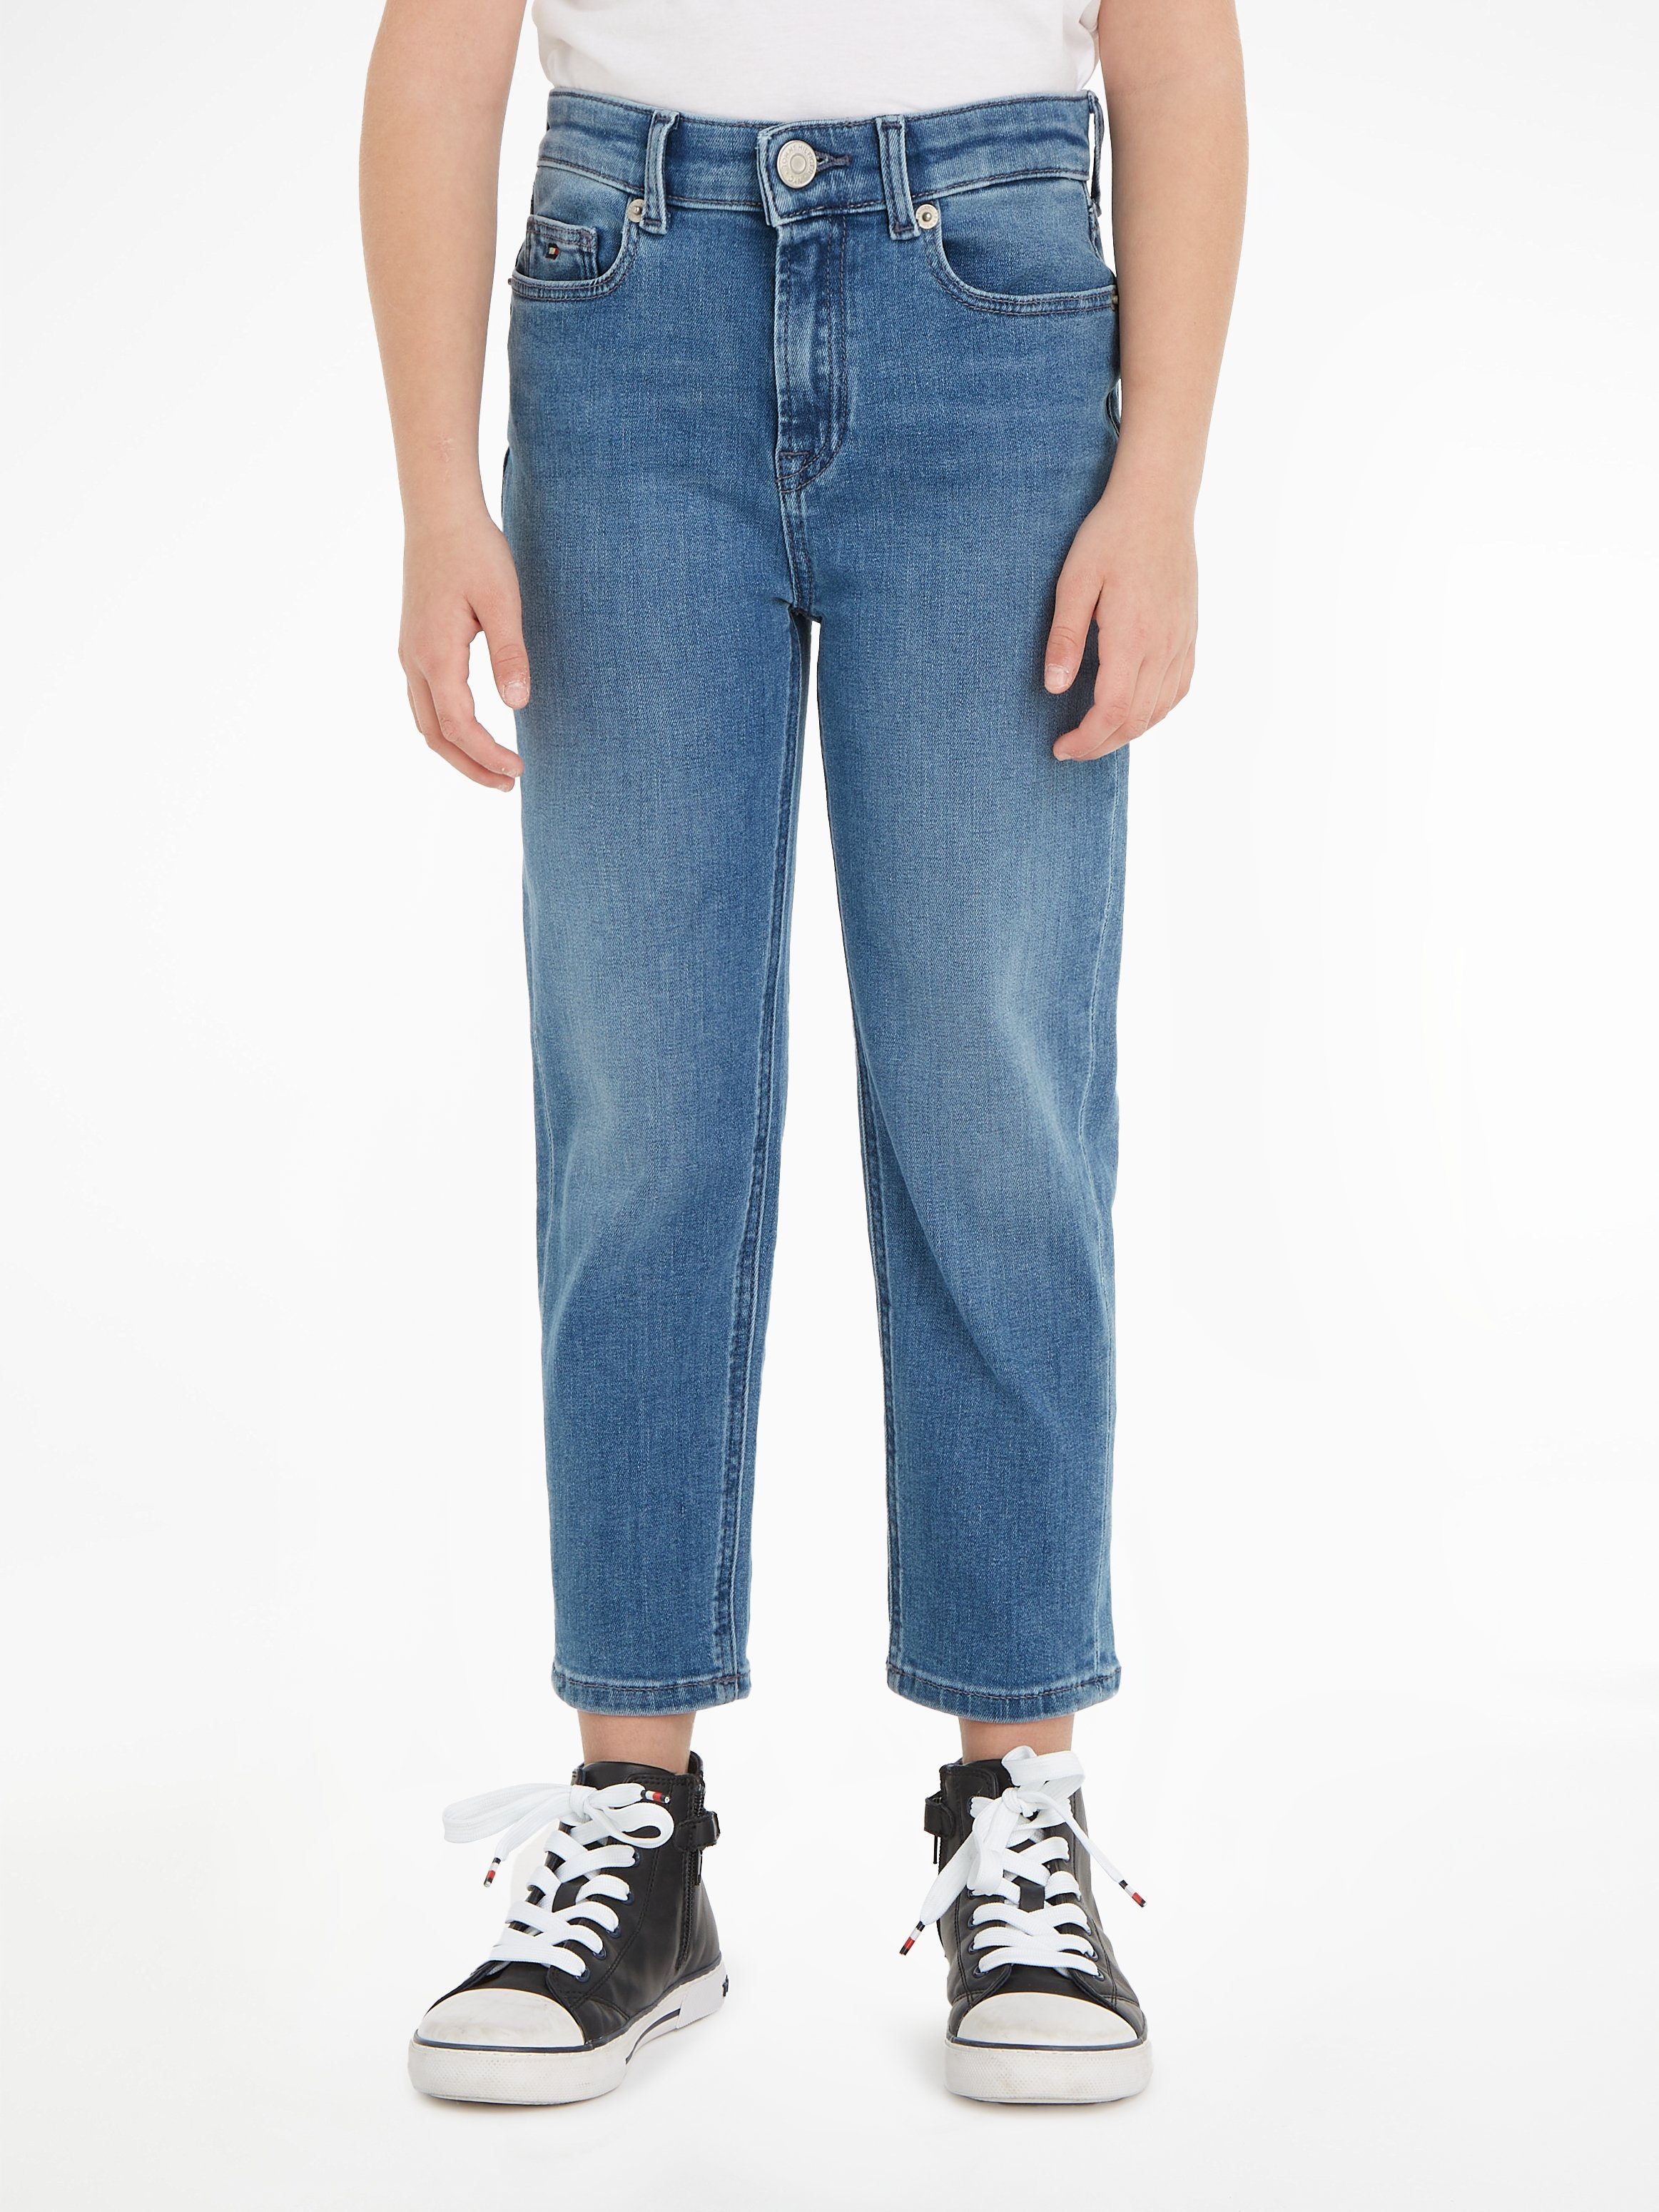 Tommy Hilfiger Tapered-fit-Jeans HR TAPERED in 7/8-Länge